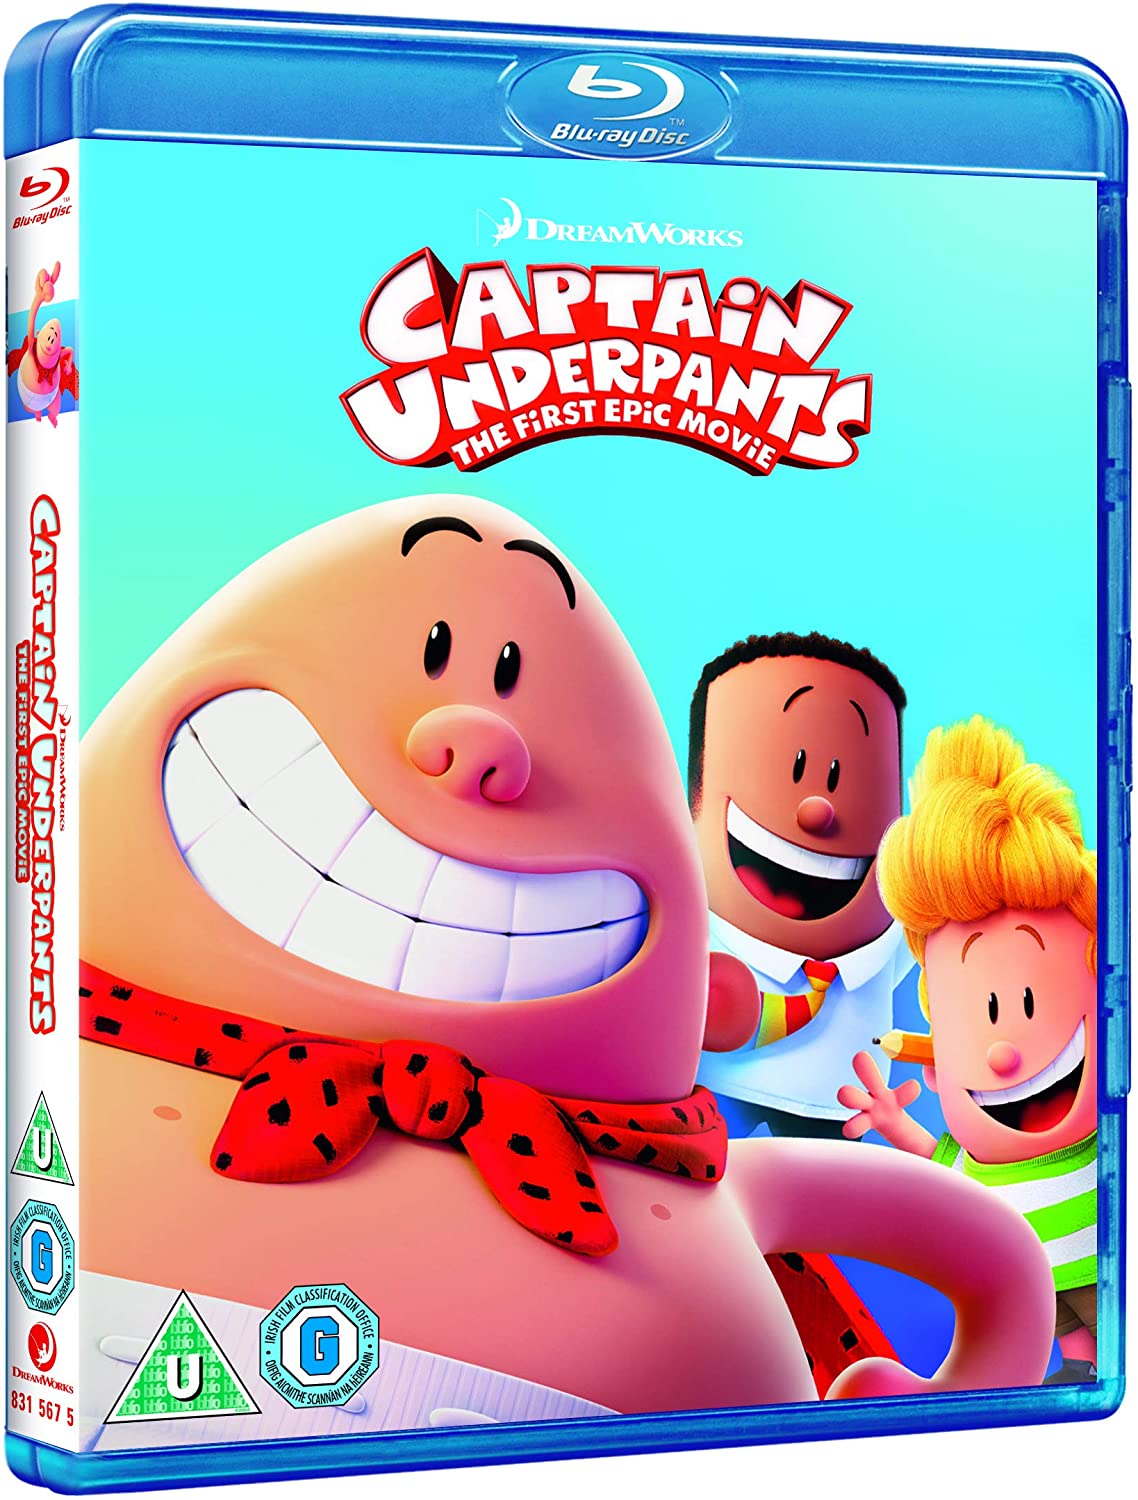 Captain Underpants: The First Epic Movie [2017] (Dreamworks) (Blu-ray)